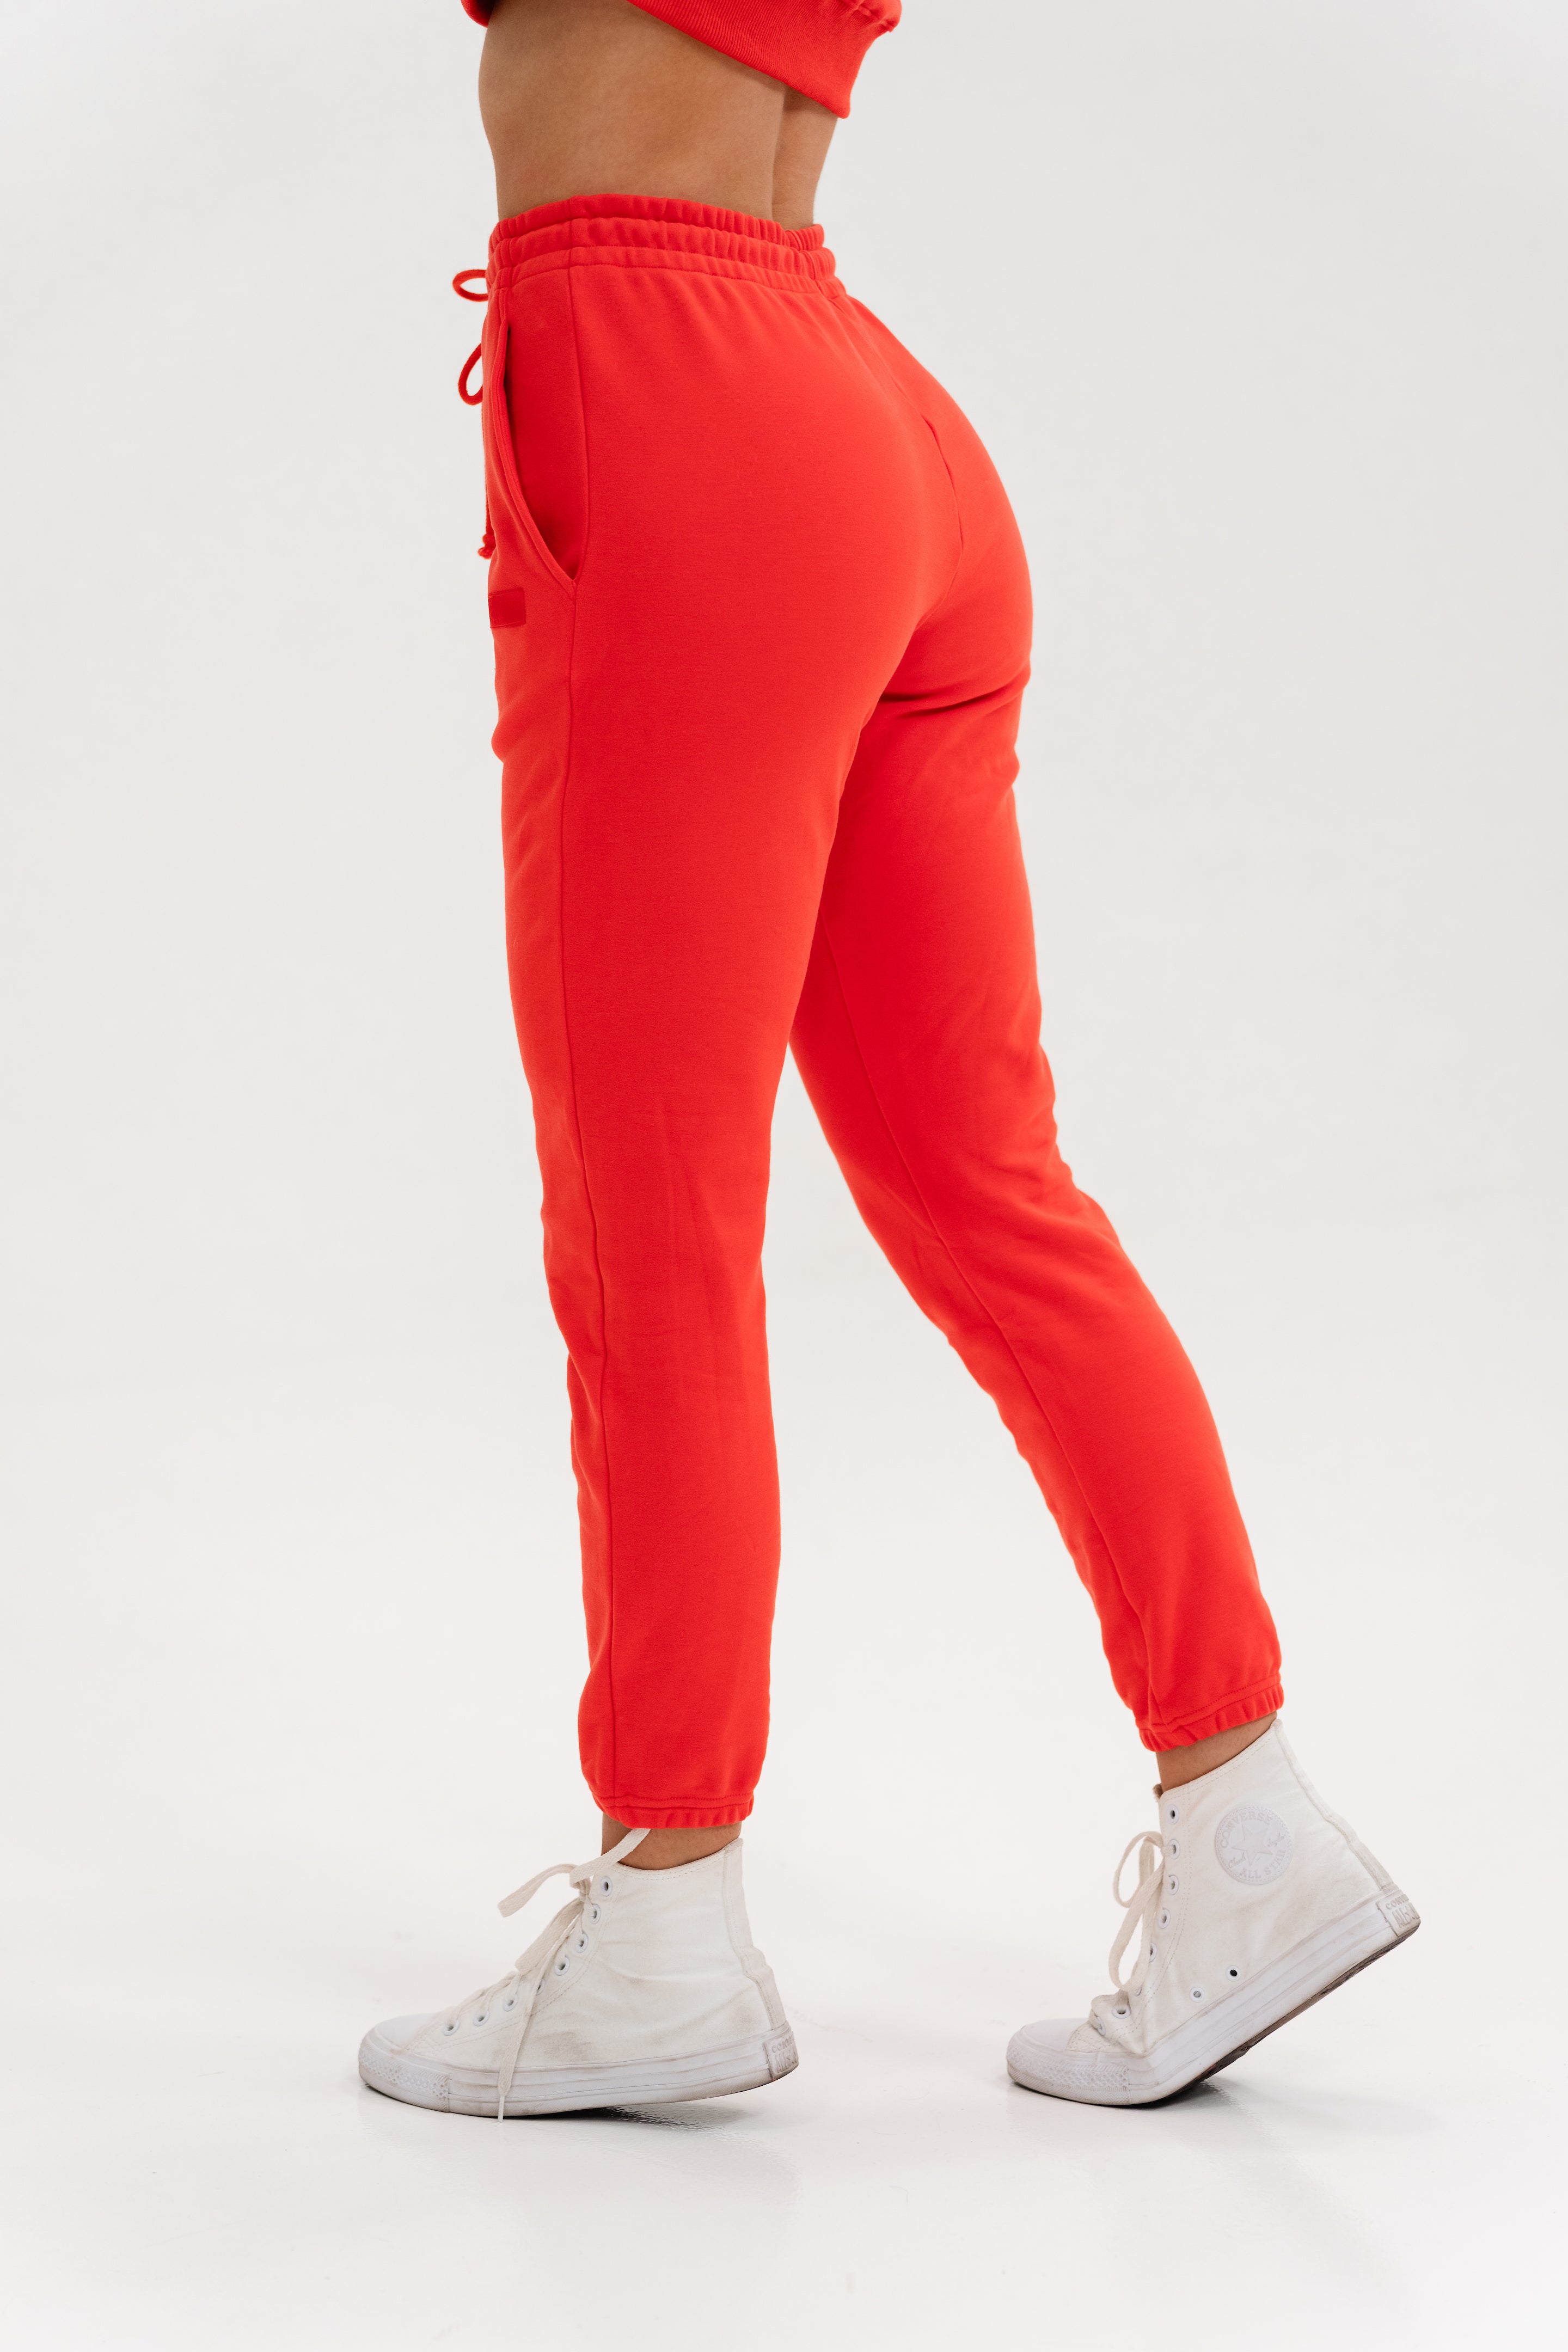 NVGTN Ruby Red Jogger Sweatpants  Red joggers, Jogger sweatpants, Joggers